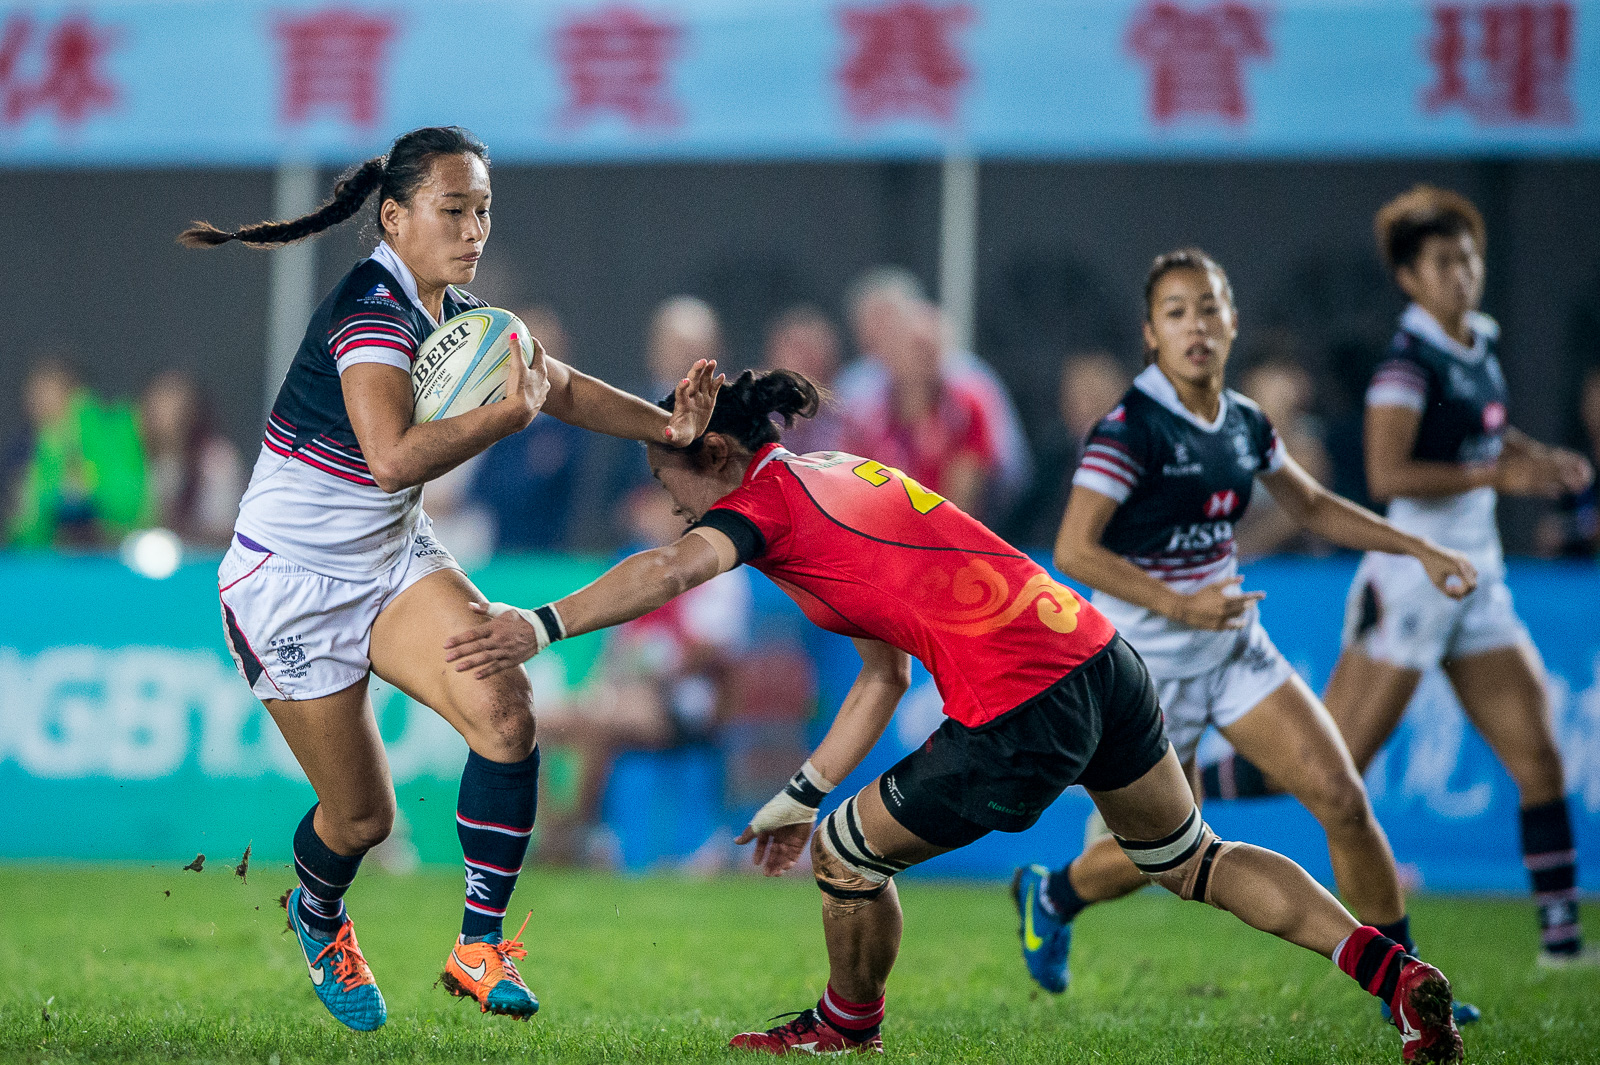 Tour skipper Christy Cheng Ka-chi leads from the front en route to Hong Kong’s Cup final triumph over the hosts at the China Sevens in Qingdao. Photos: HKRU